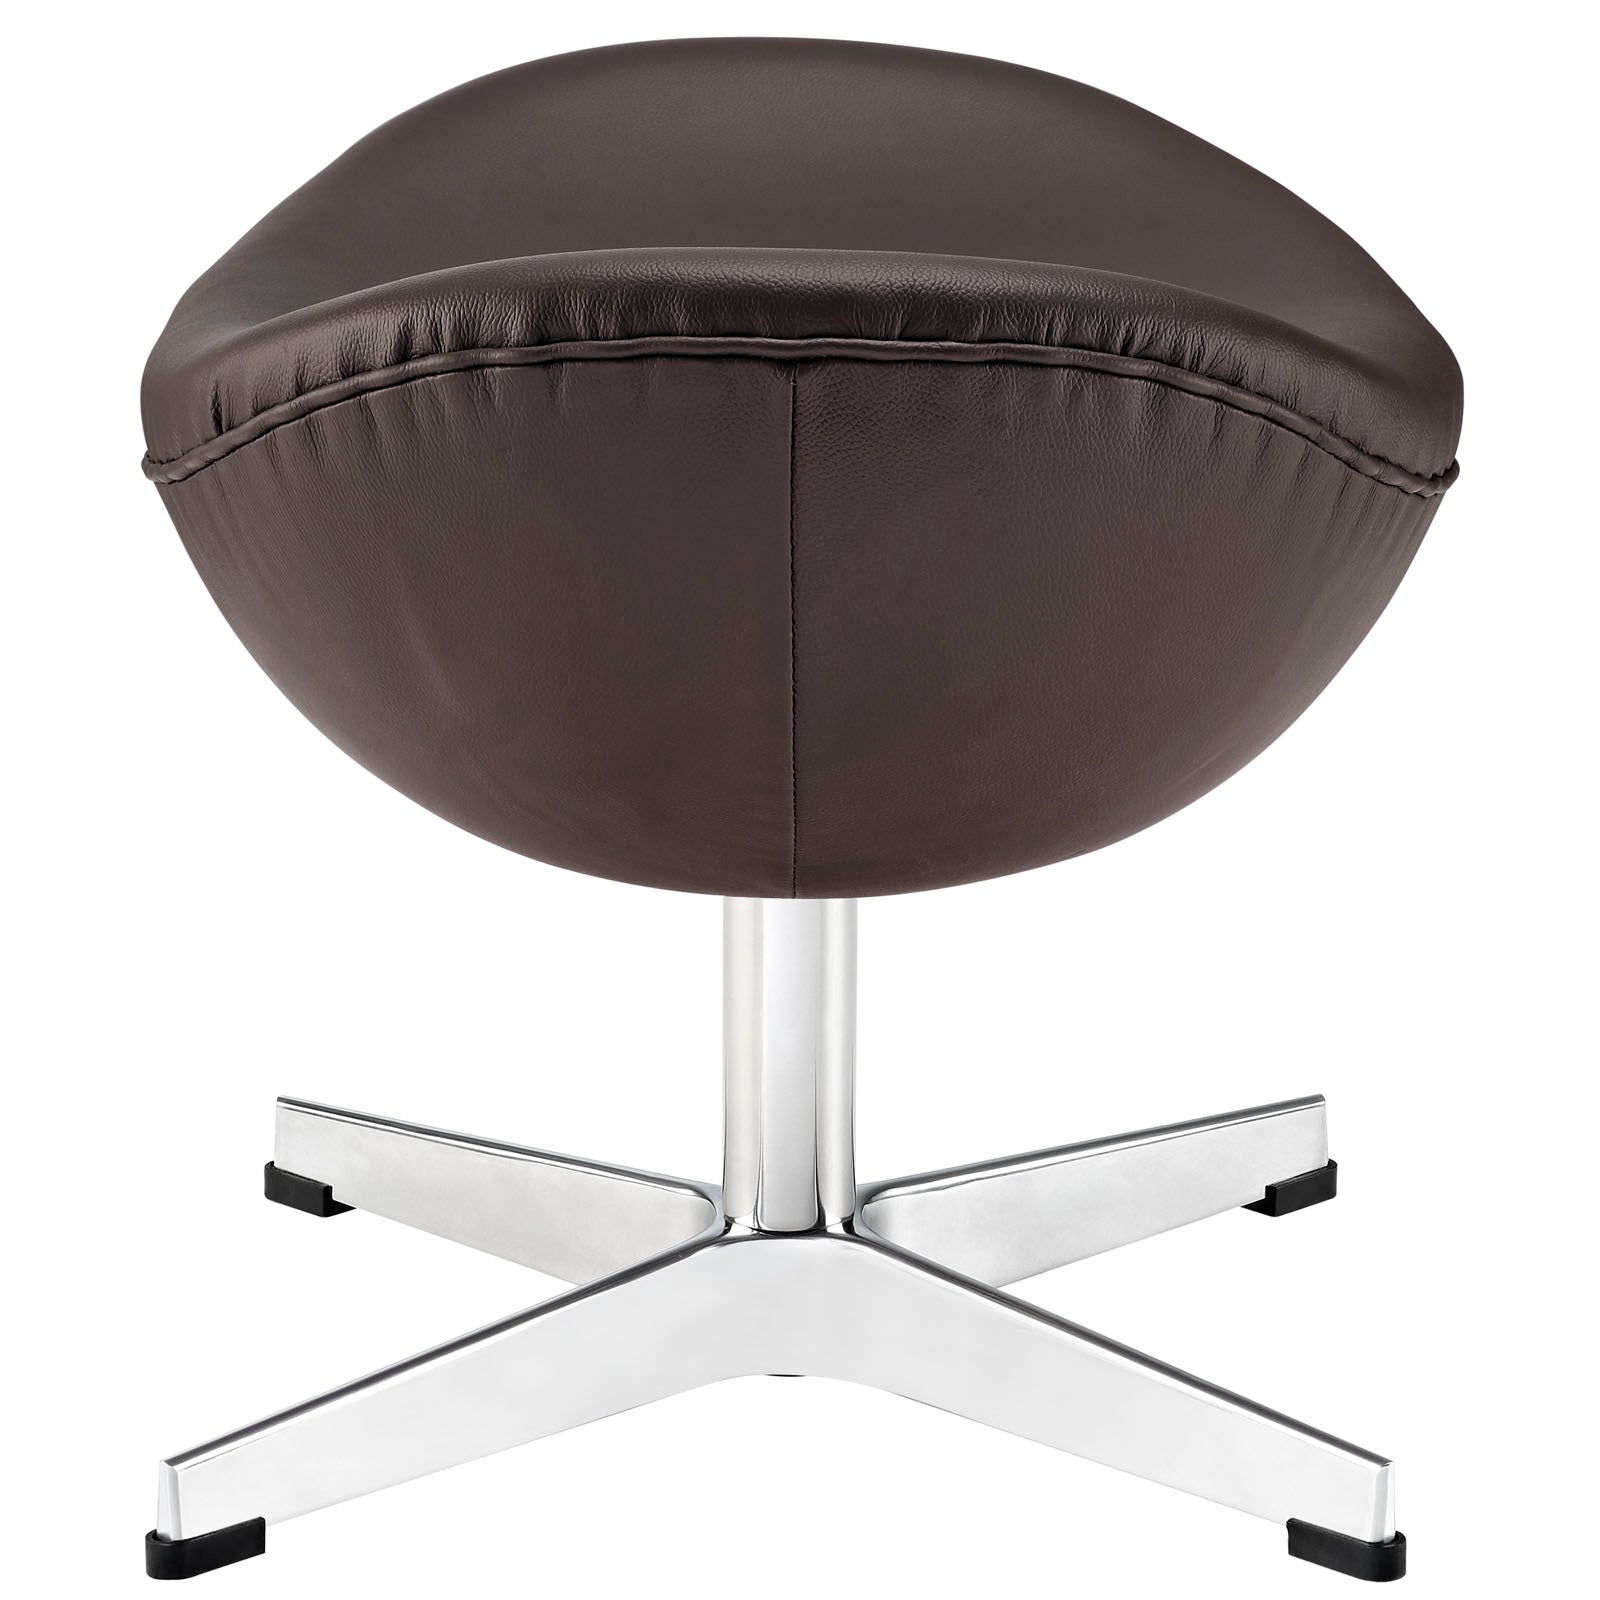 Modway Ottomans & Stools - Glove Leather Ottoman Brown